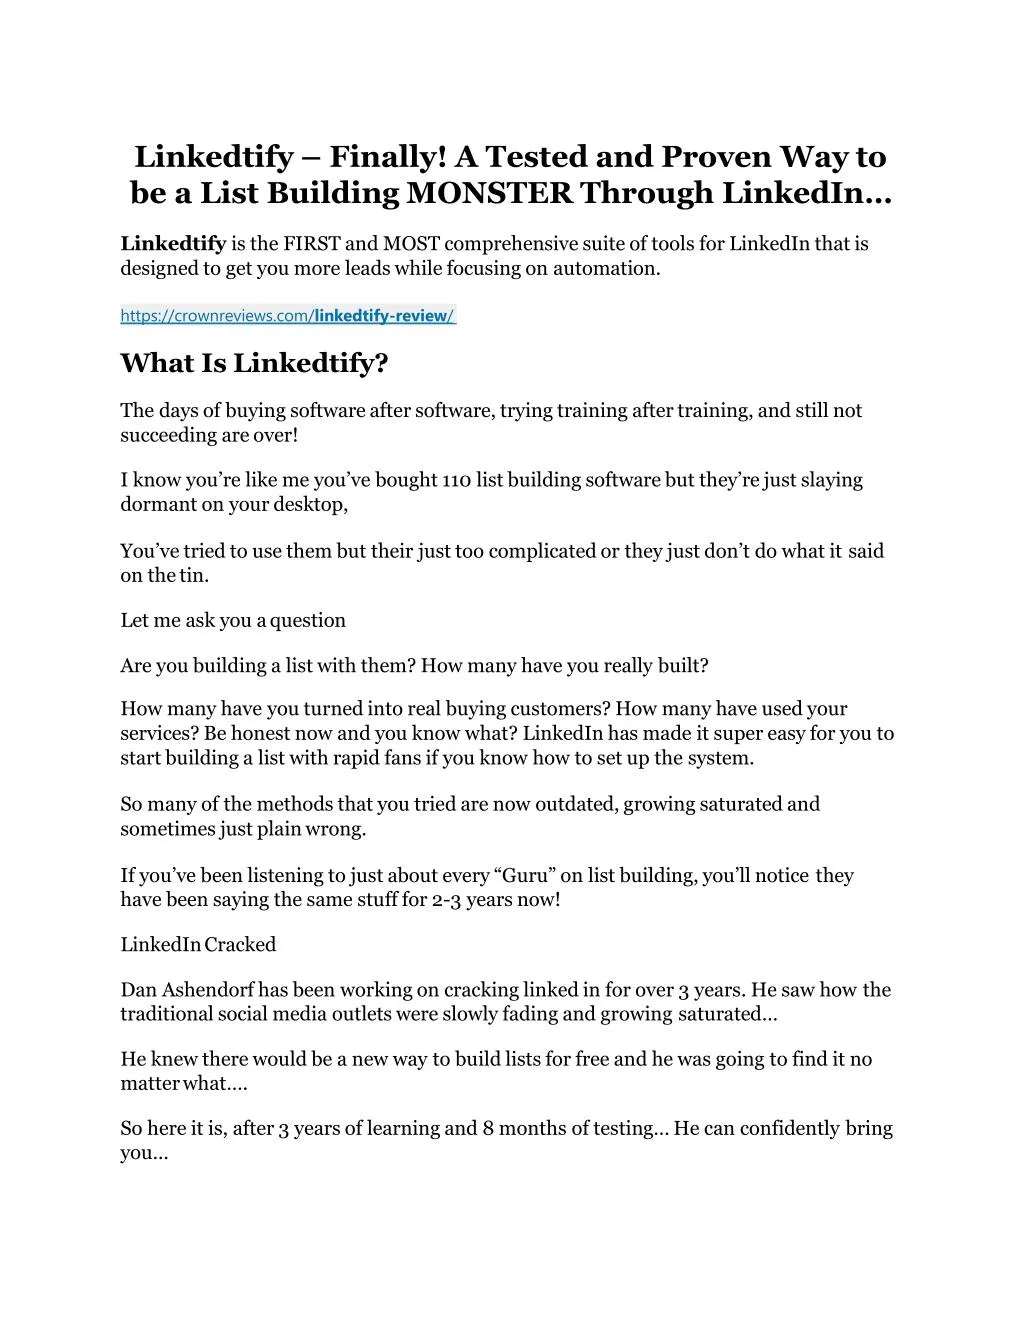 linkedtify finally a tested and proven